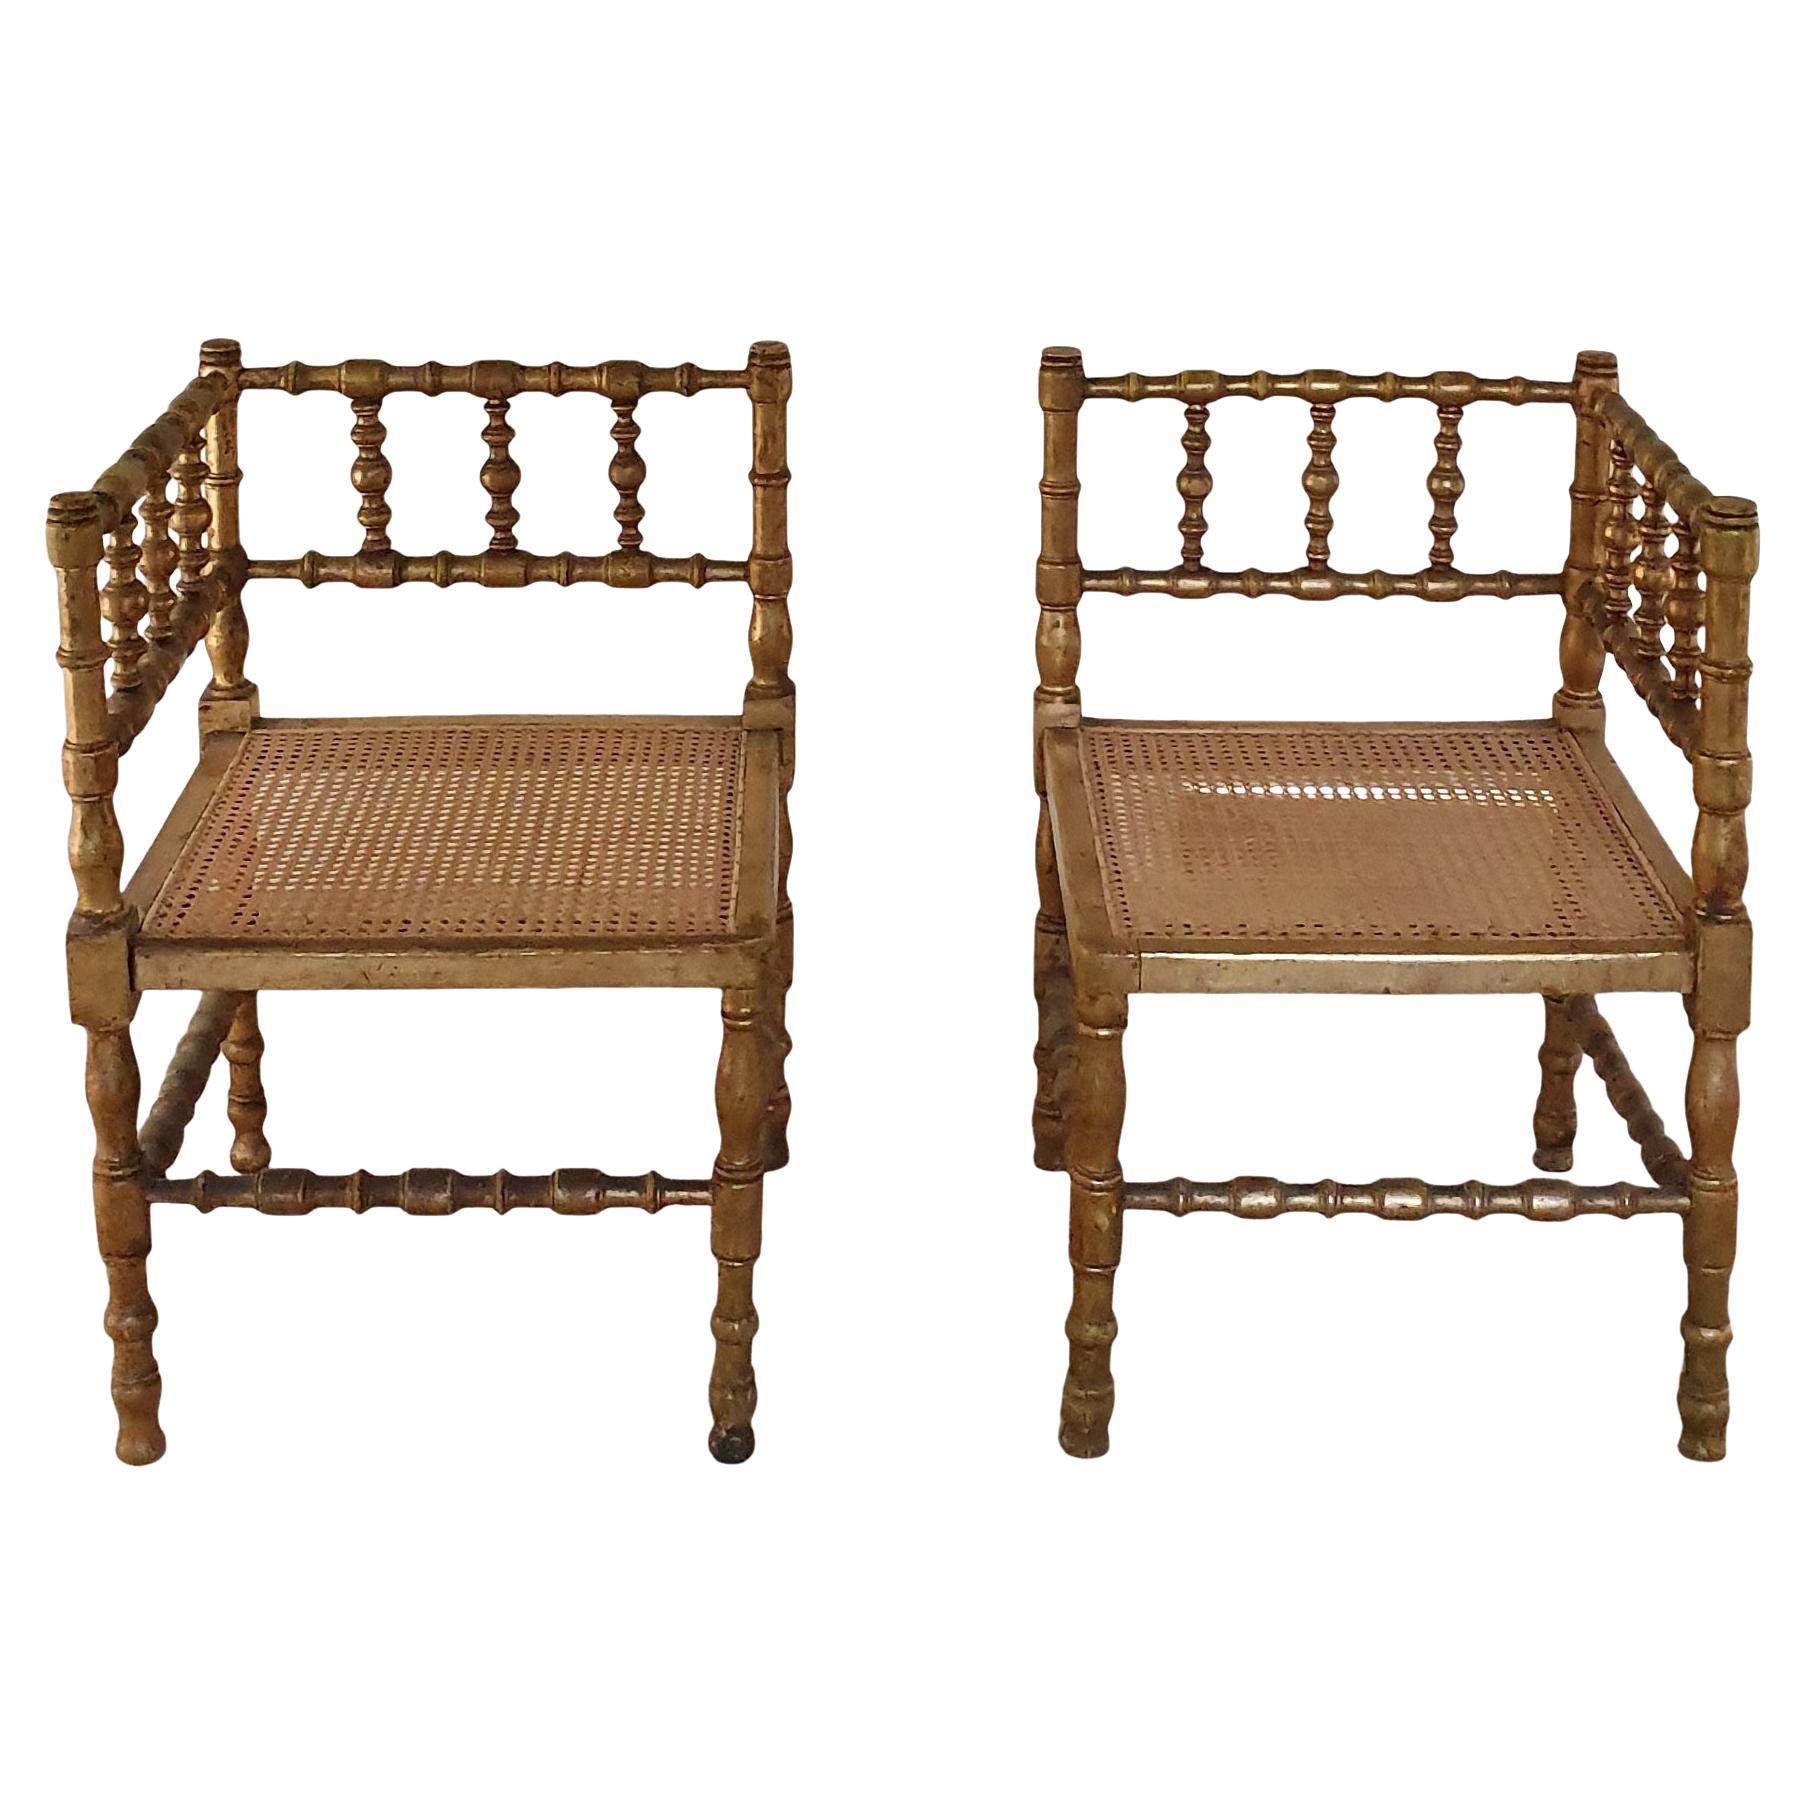 Pair of French Provincial Gilded Hand Carved Bobbin Chairs with Woven Cane Seats